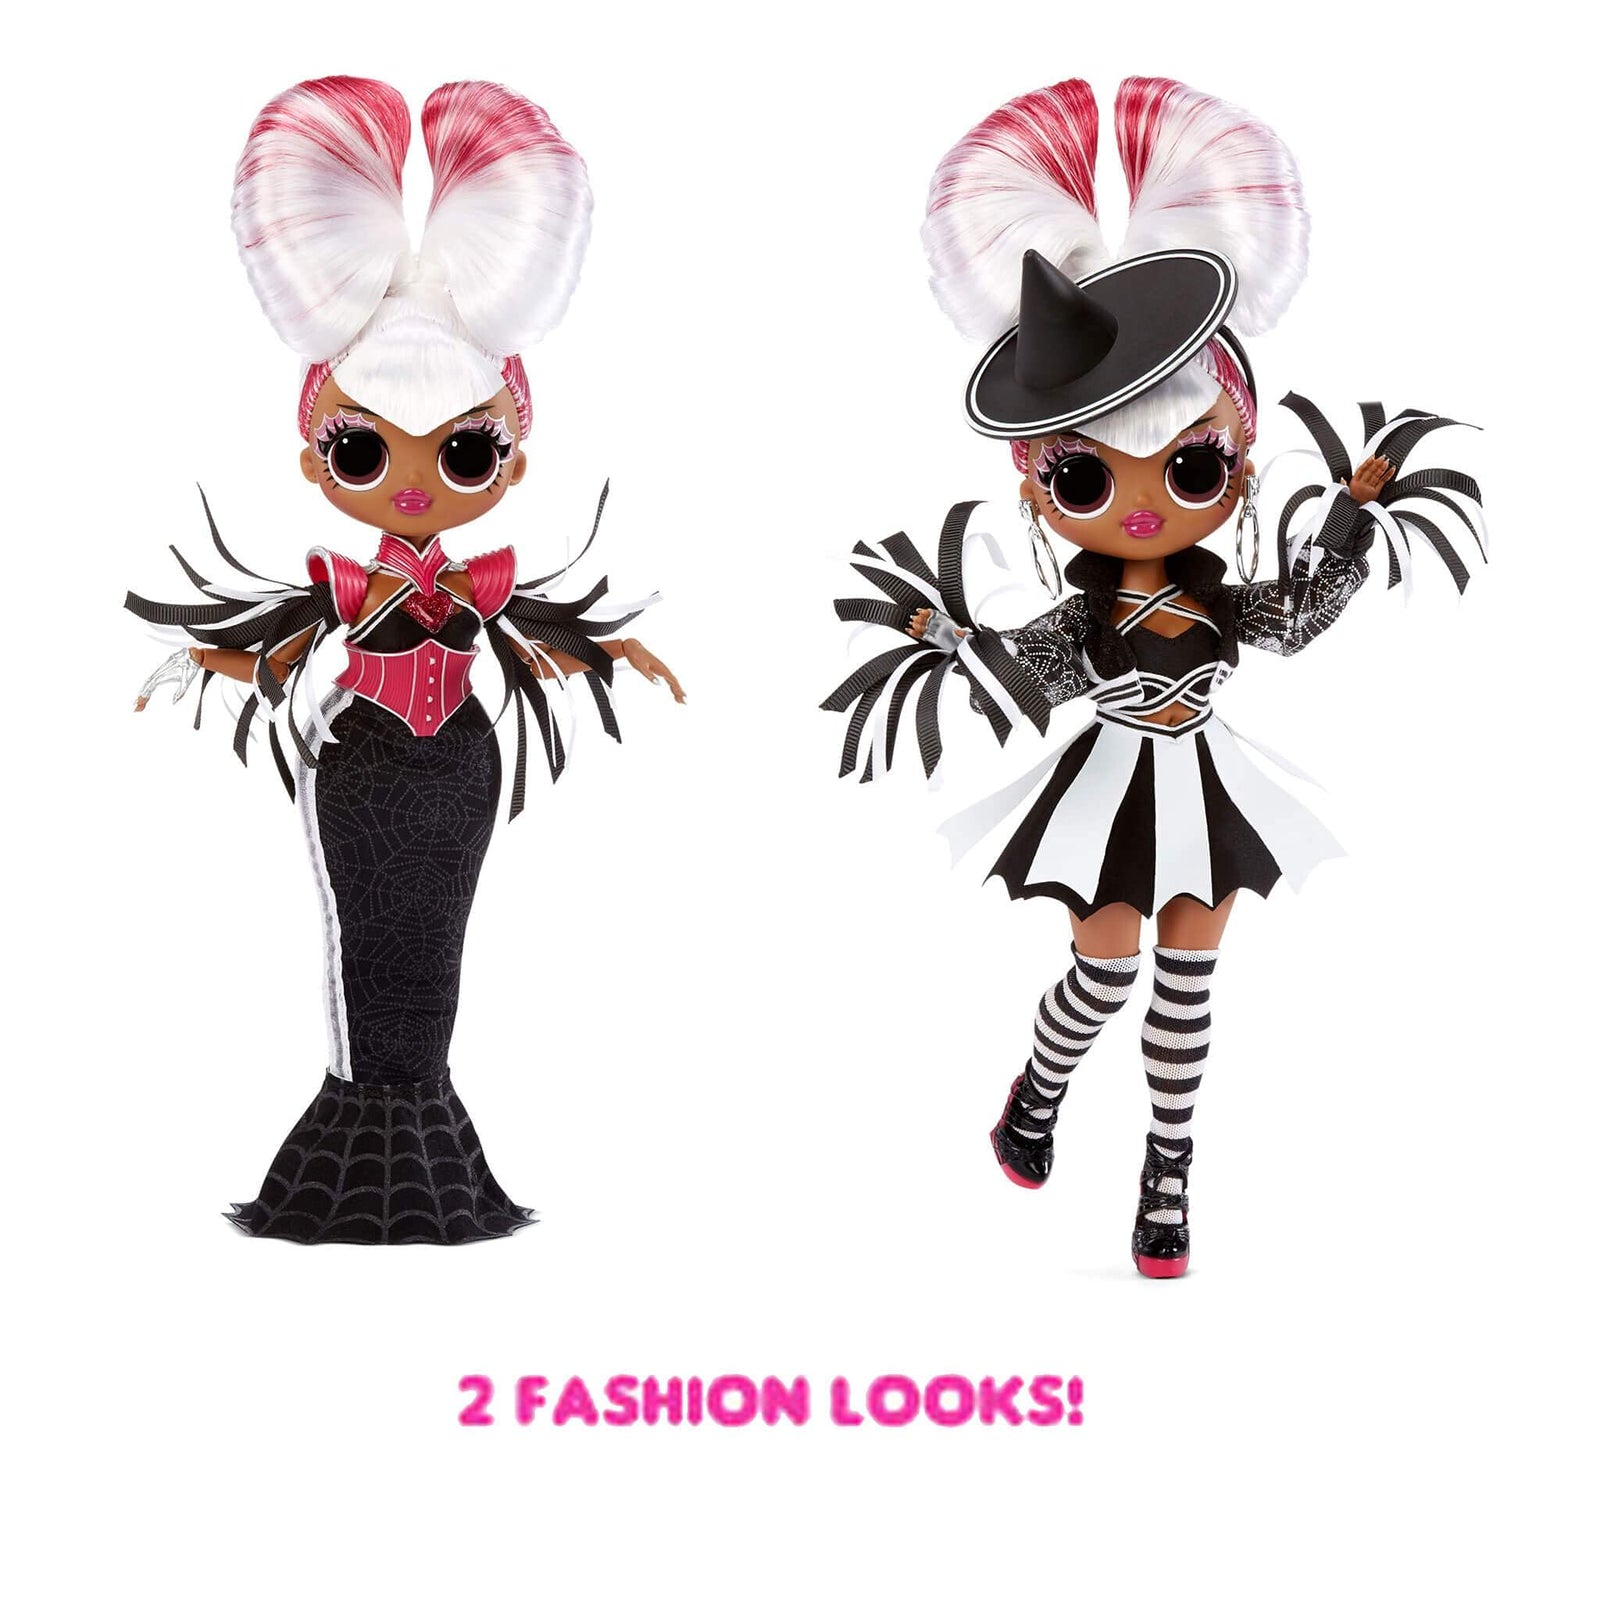 LOL Surprise OMG Movie Magic Spirit Queen Fashion Doll with 25 Surprises Including 2 Outfits, 3D Glasses, Movie Accessories and Reusable Playset– Gift for Kids, Toys for Girls Boys Ages 4 5 6 7+ Years